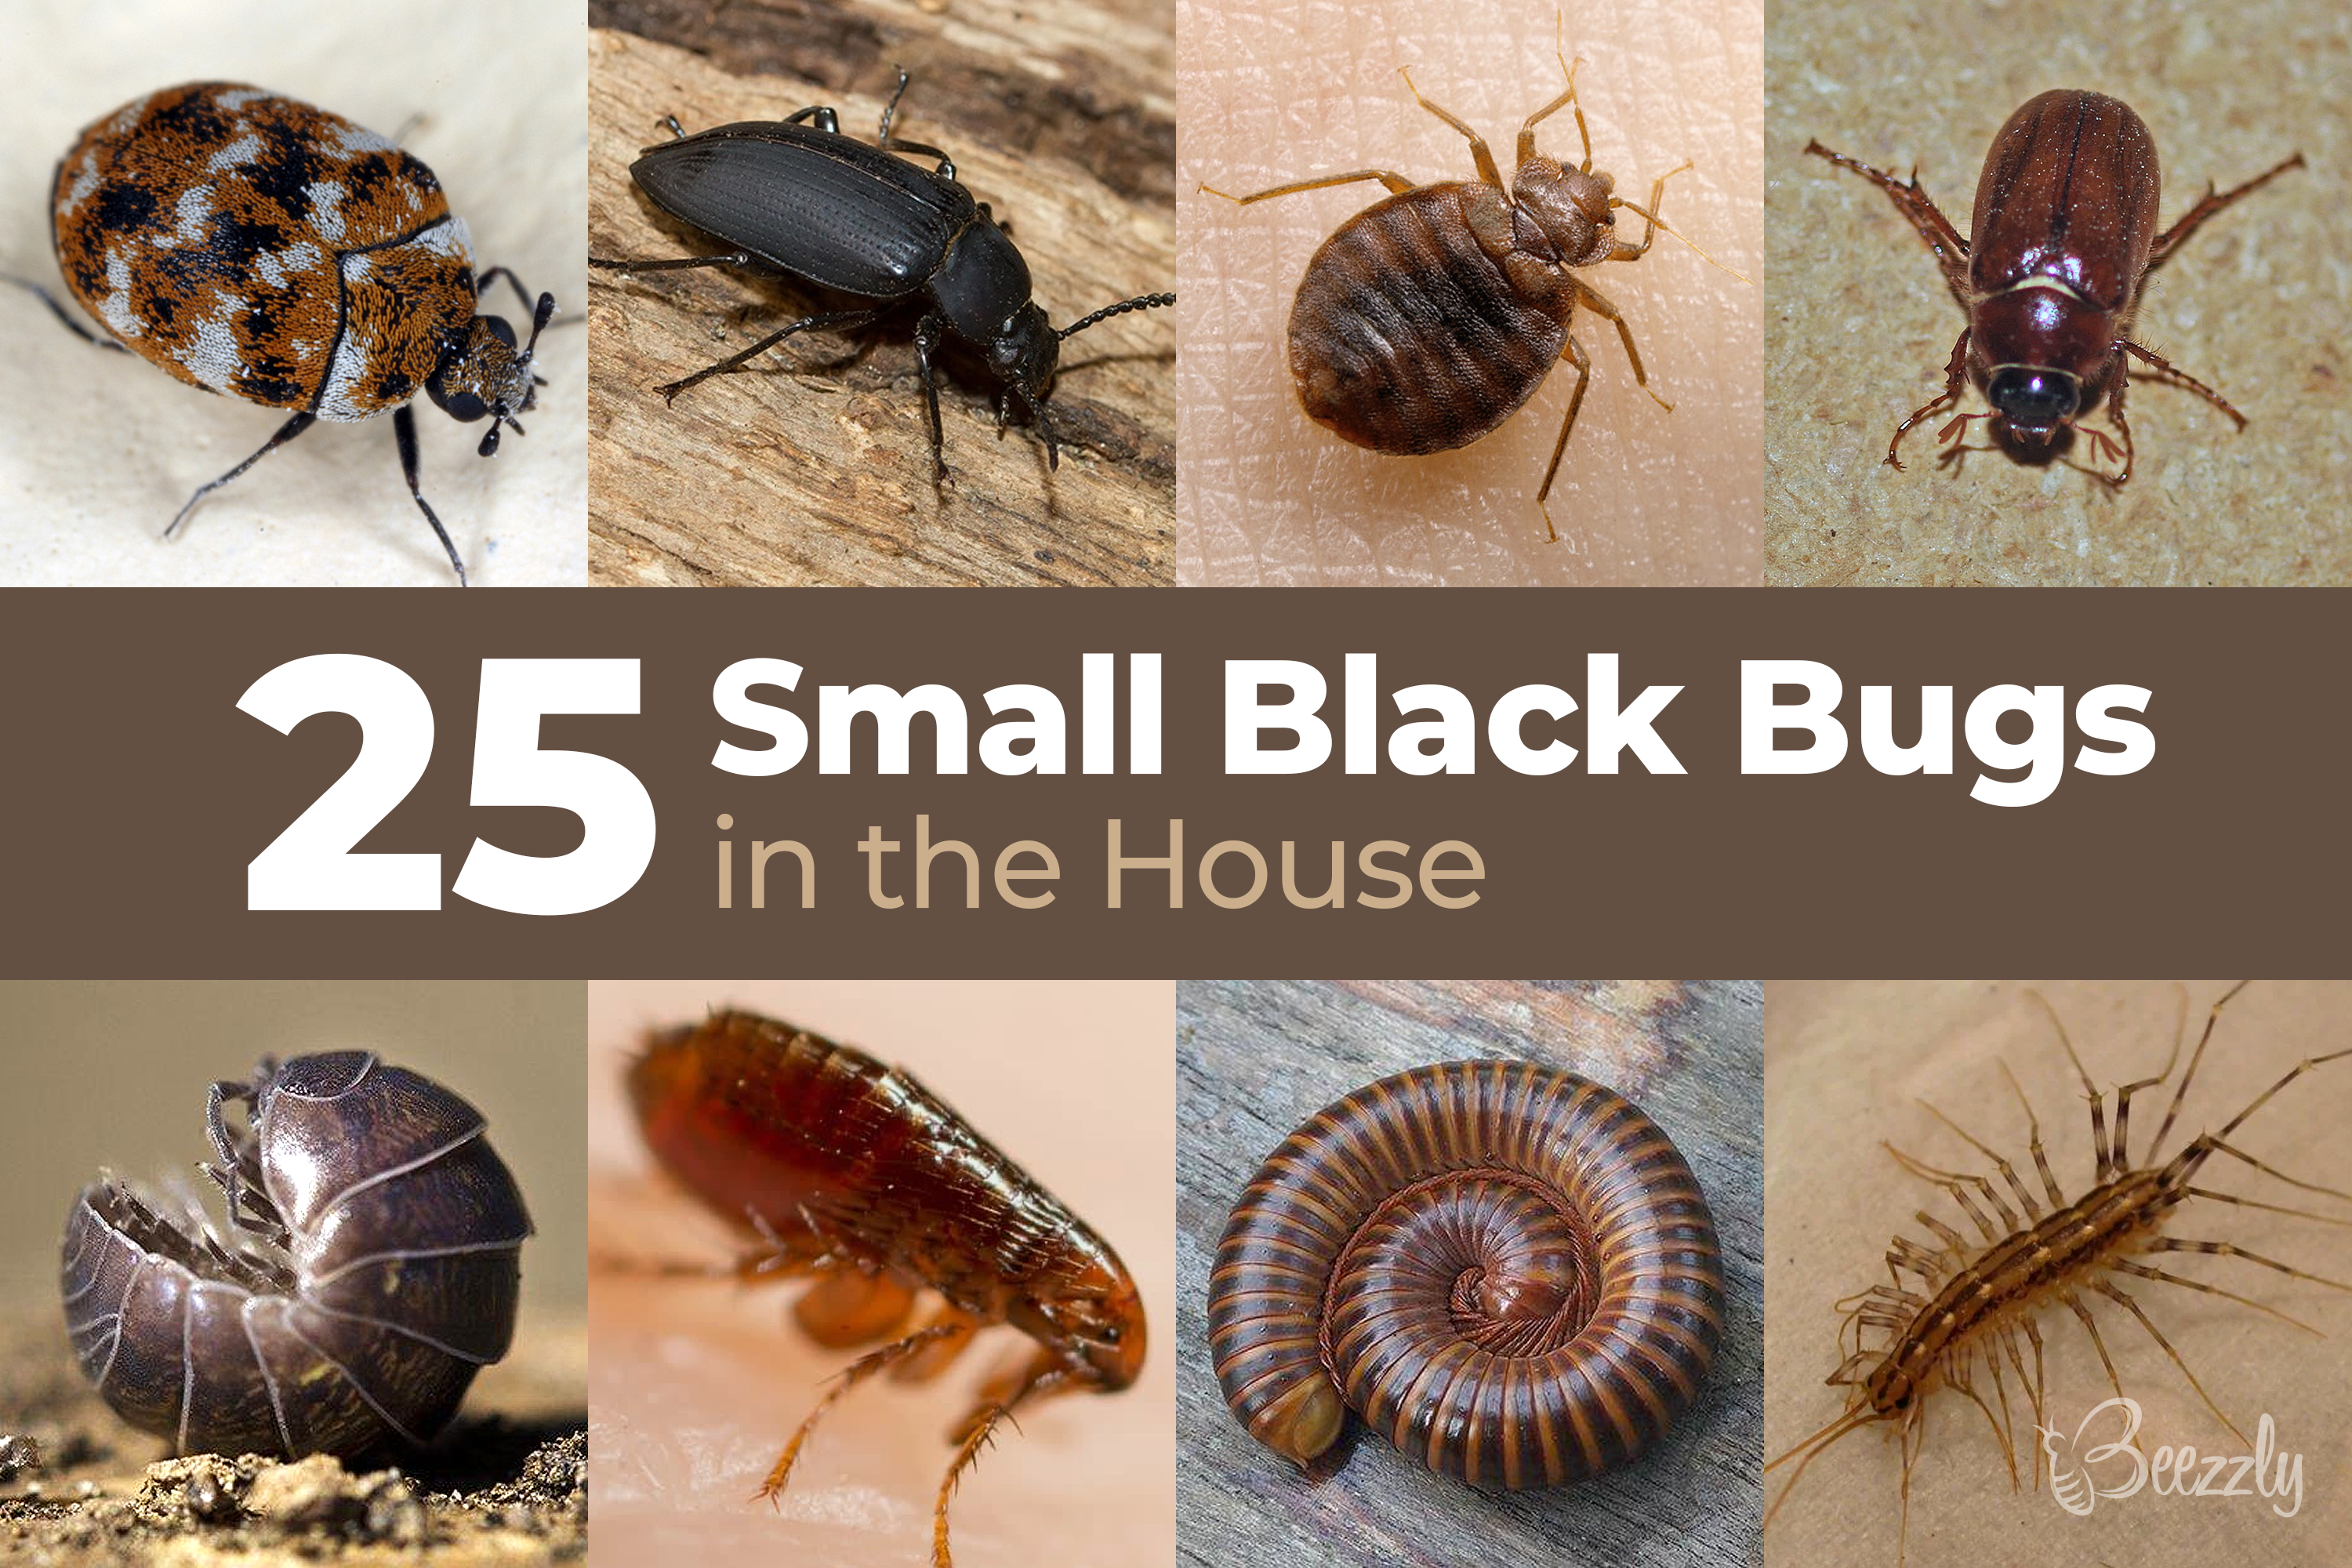 Small Black Bugs In the House